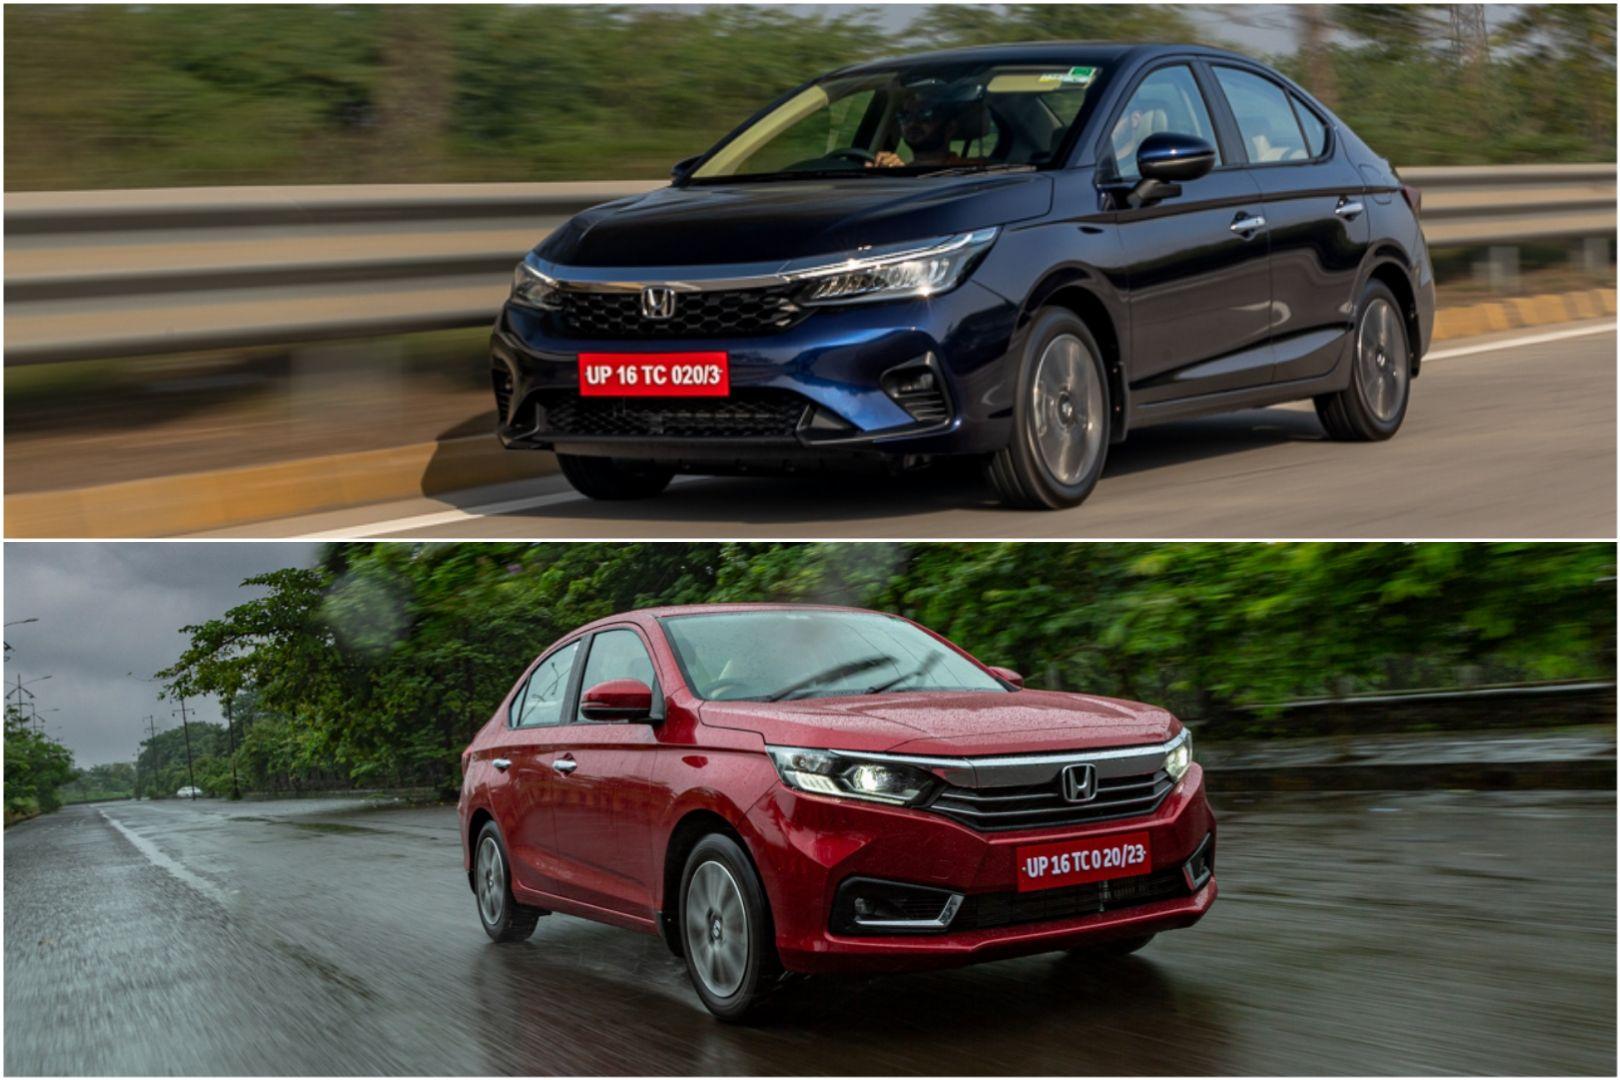 Get Benefits Of Over 90,000 On Honda Cars This Diwali